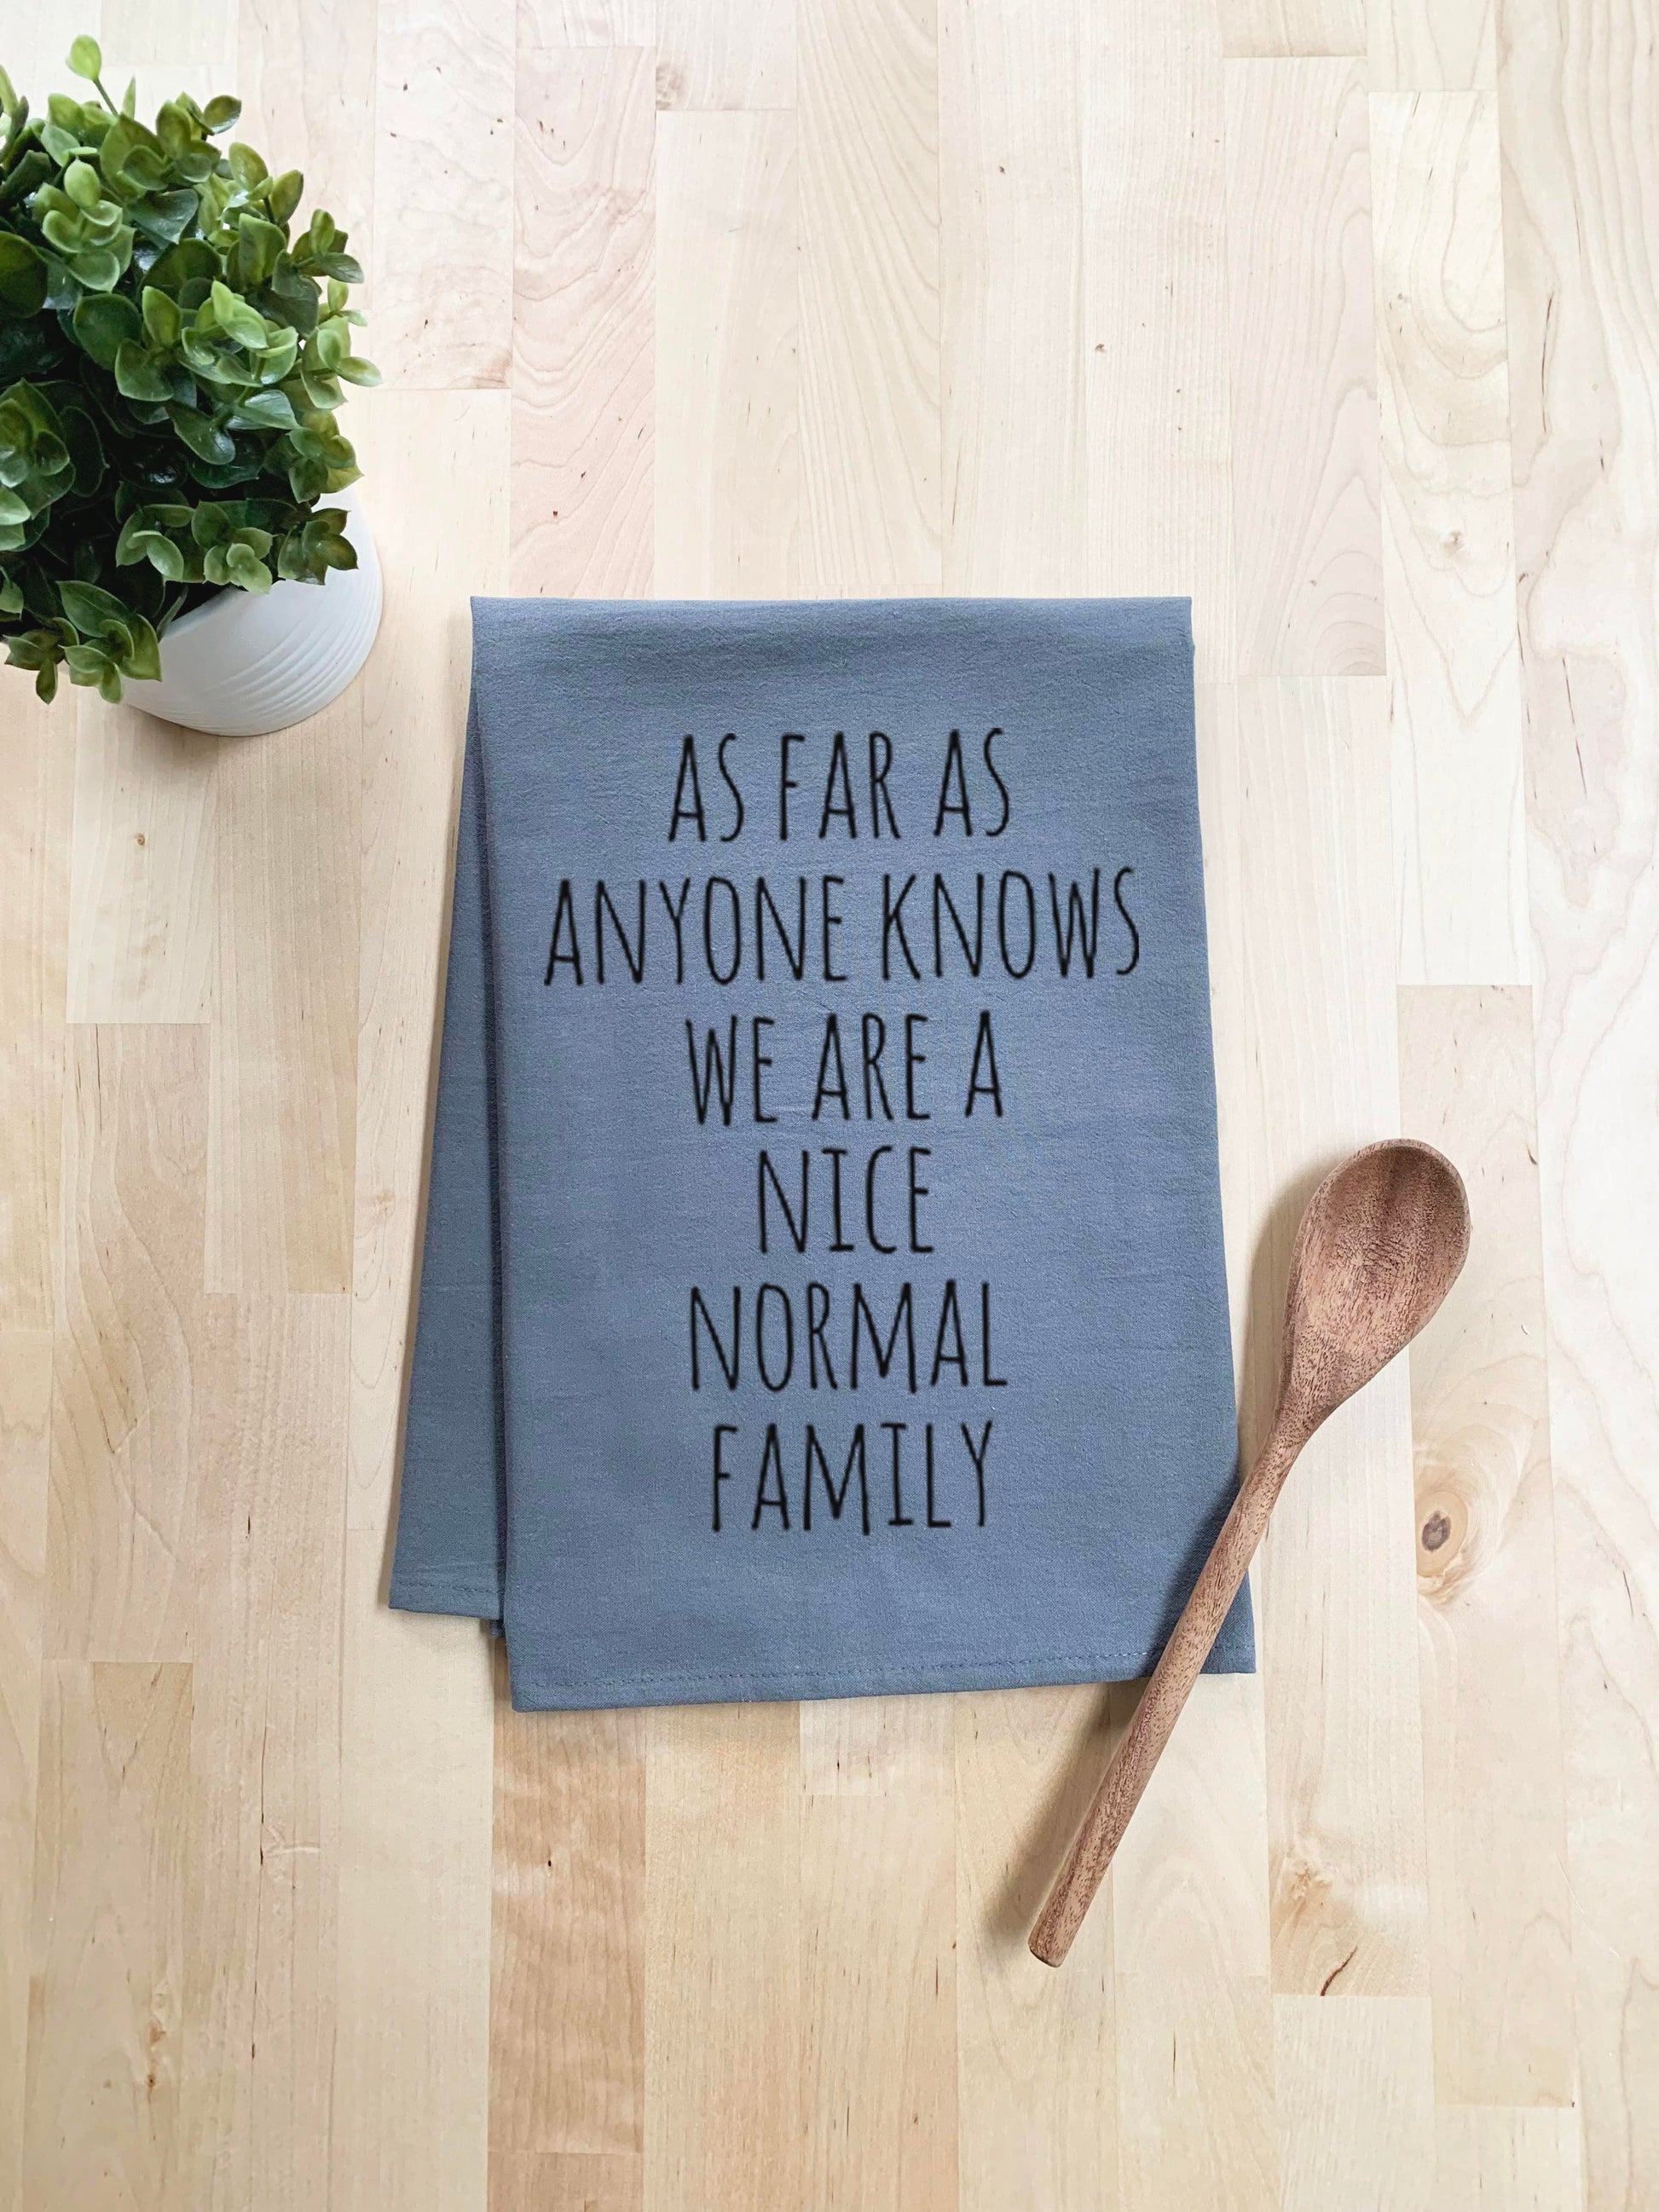 As Far As Anyone Knows We Are a Nice Normal Family Dish Towel - White Or Gray - MoonlightMakers